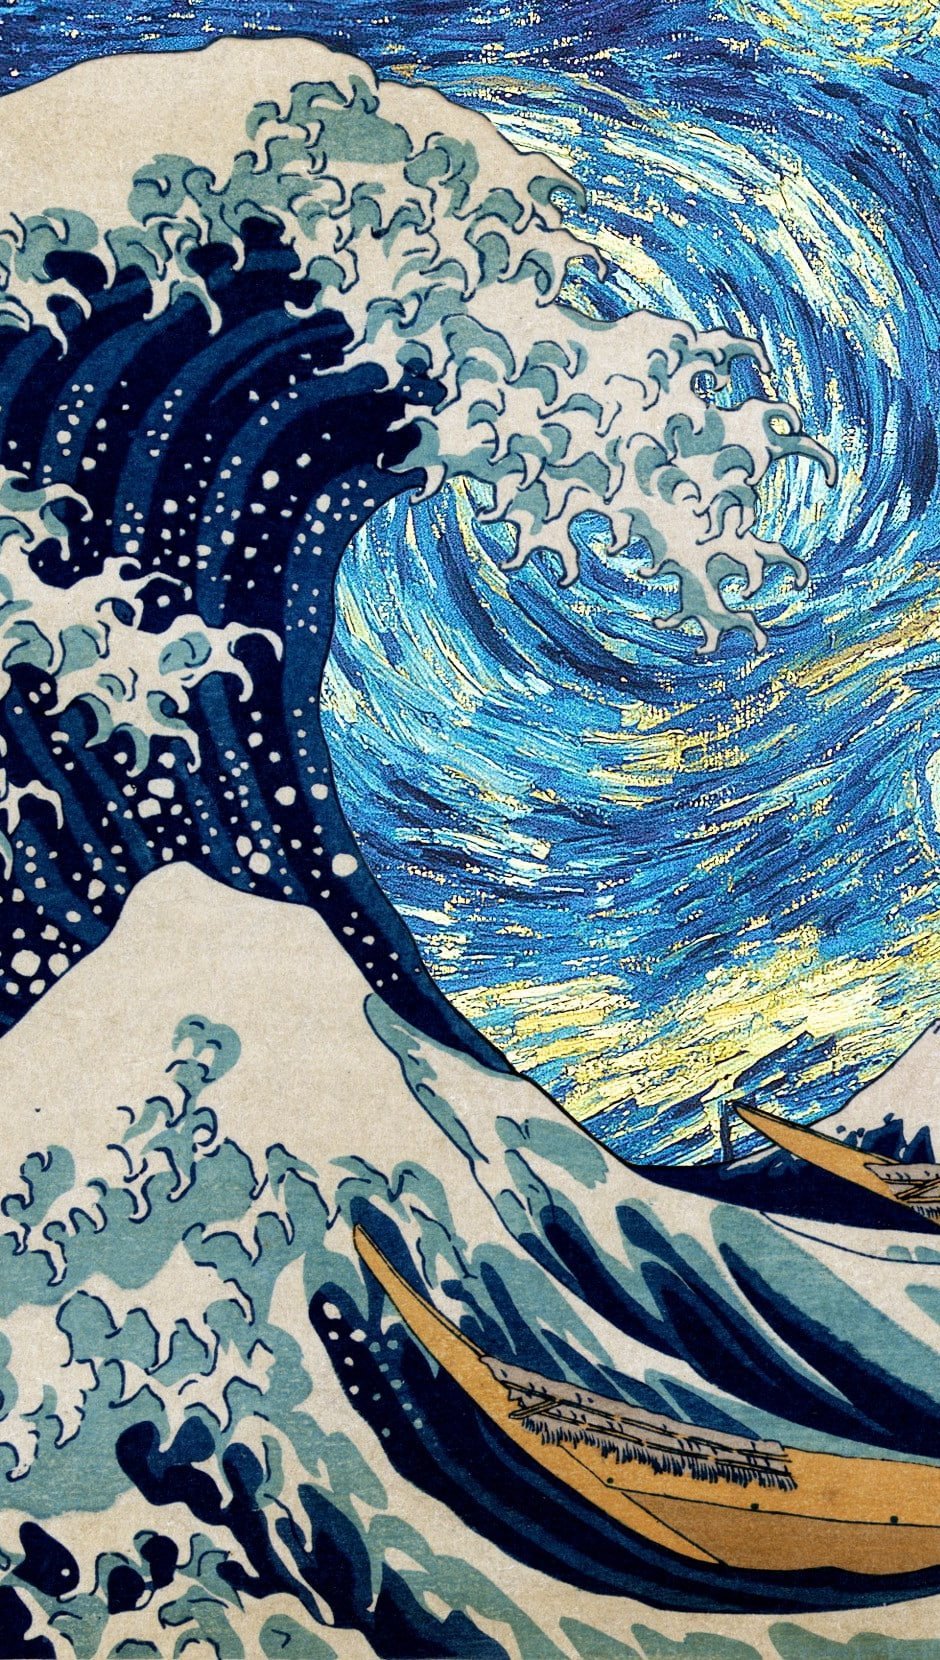 The Great Wave and Starry Night Wallpaper 2k Quad HD ID:10846